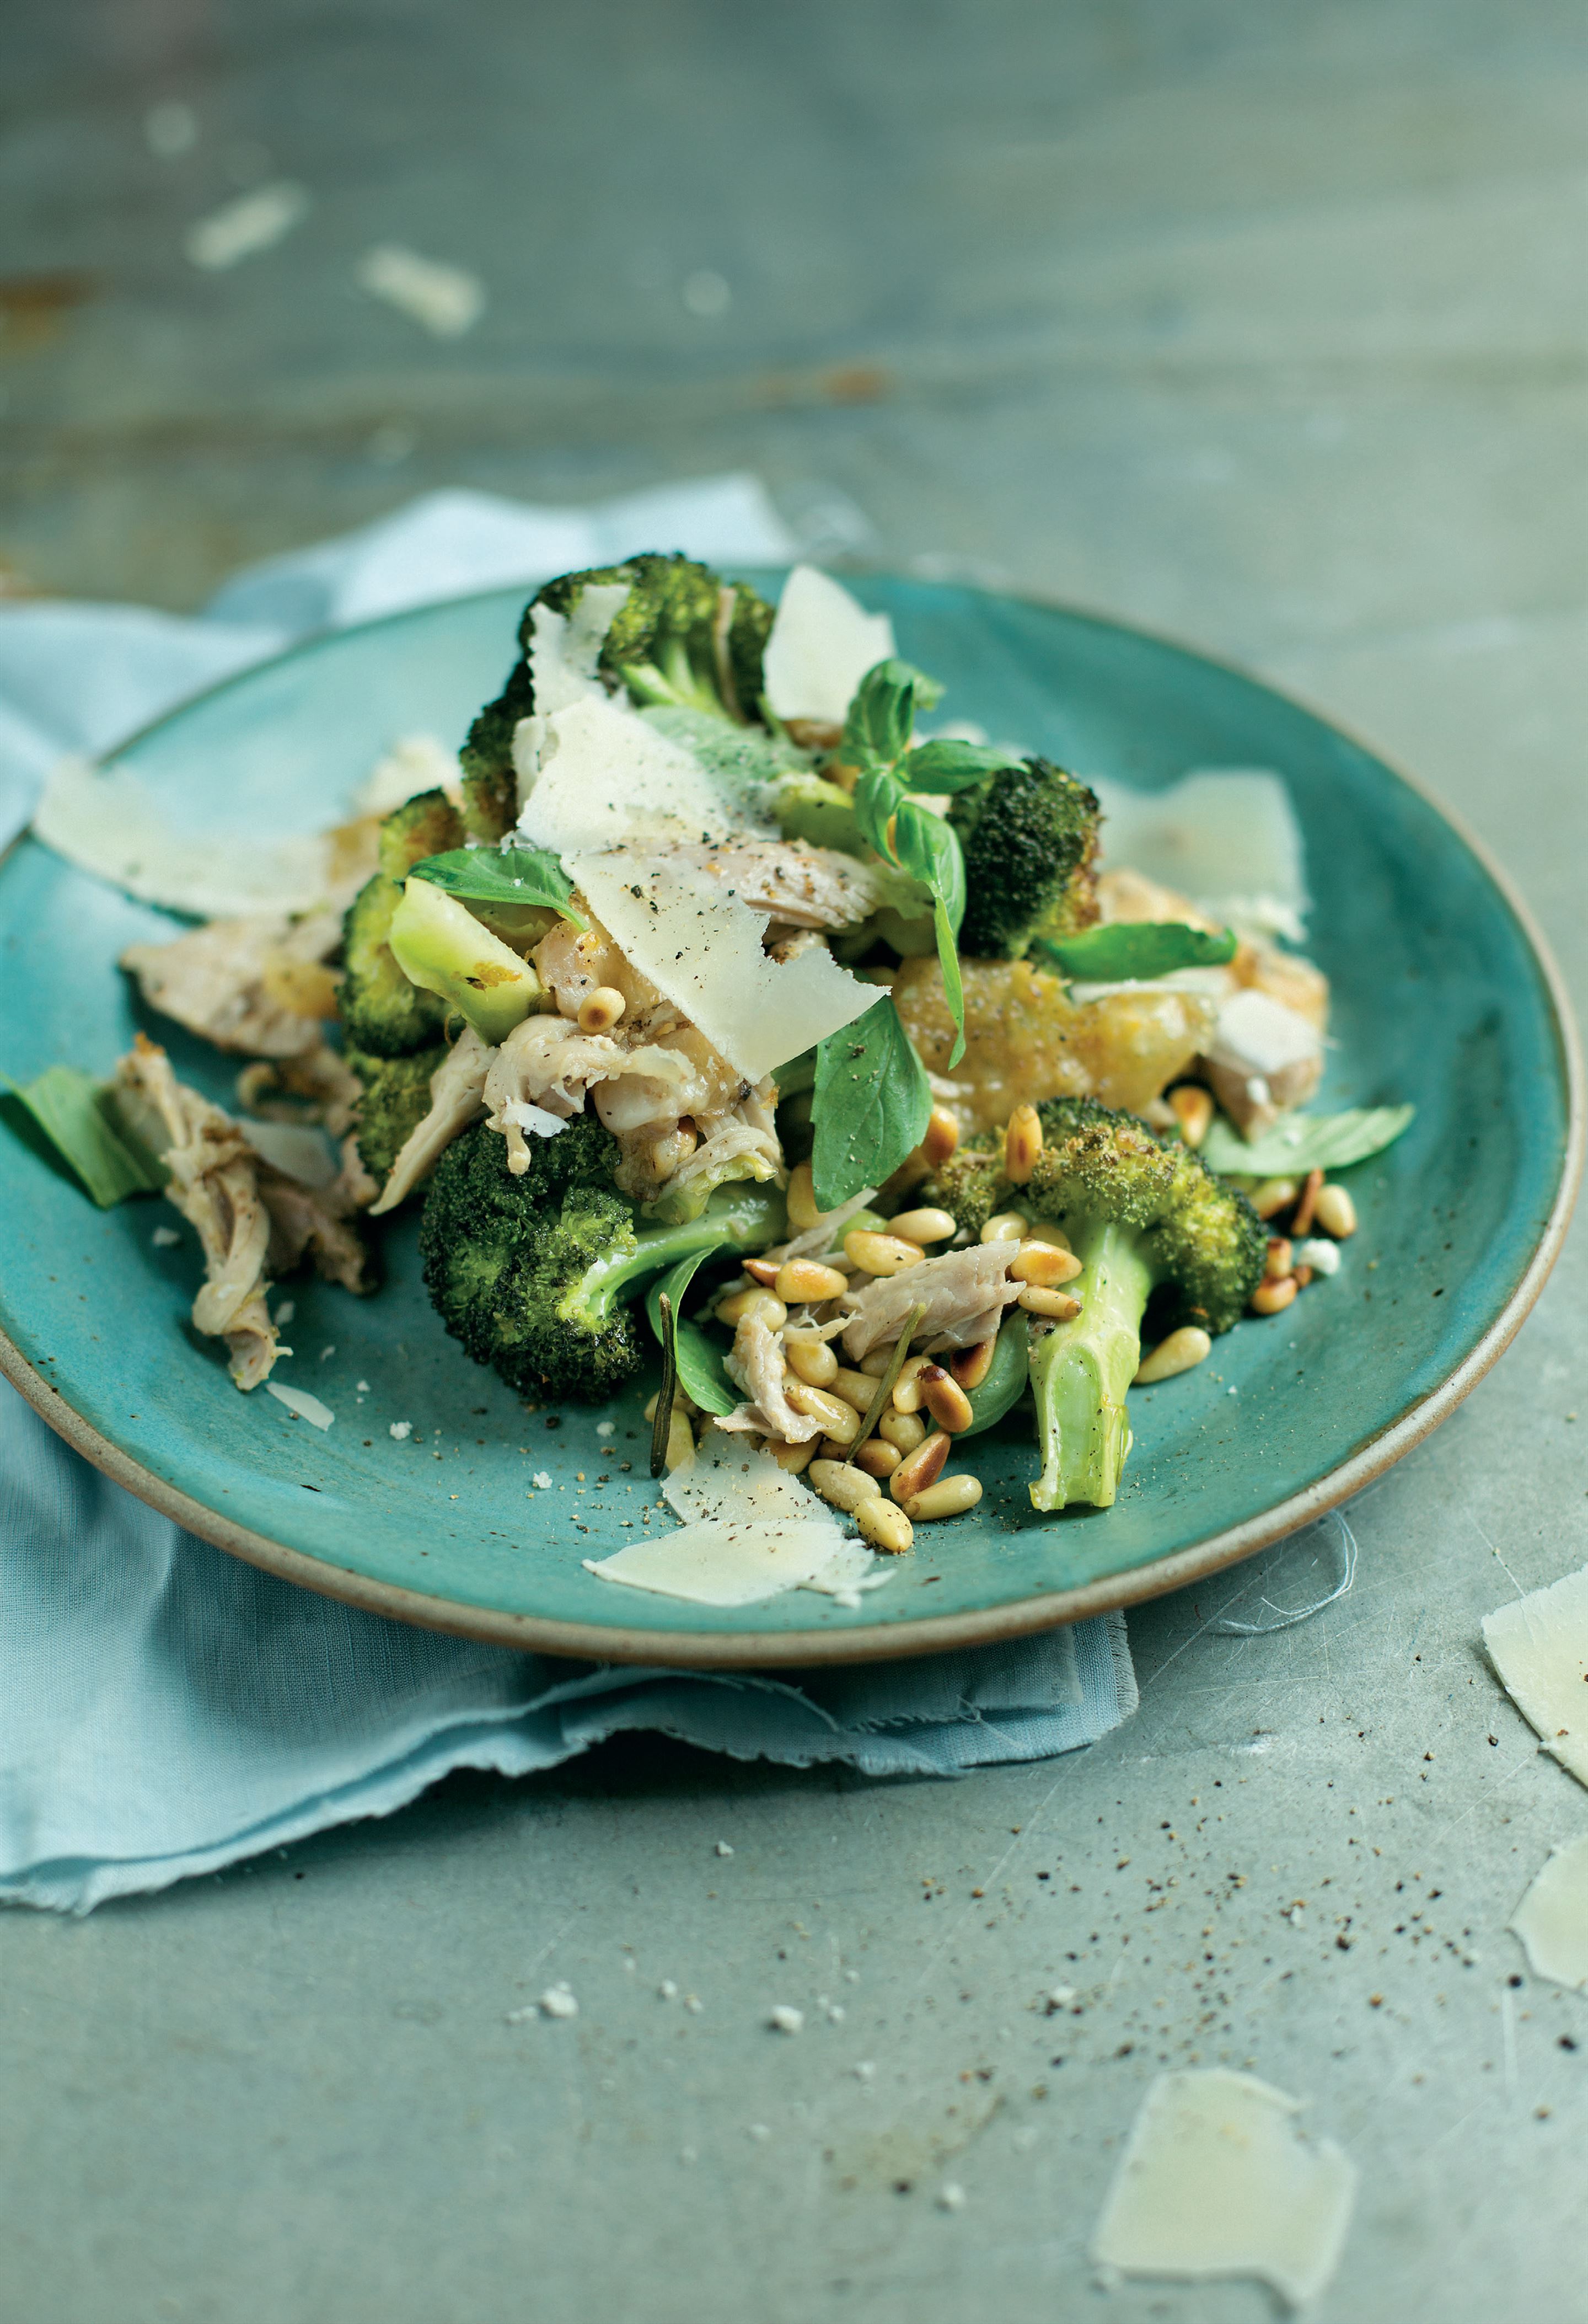 Roast broccoli with shredded chicken, pine nuts and basil